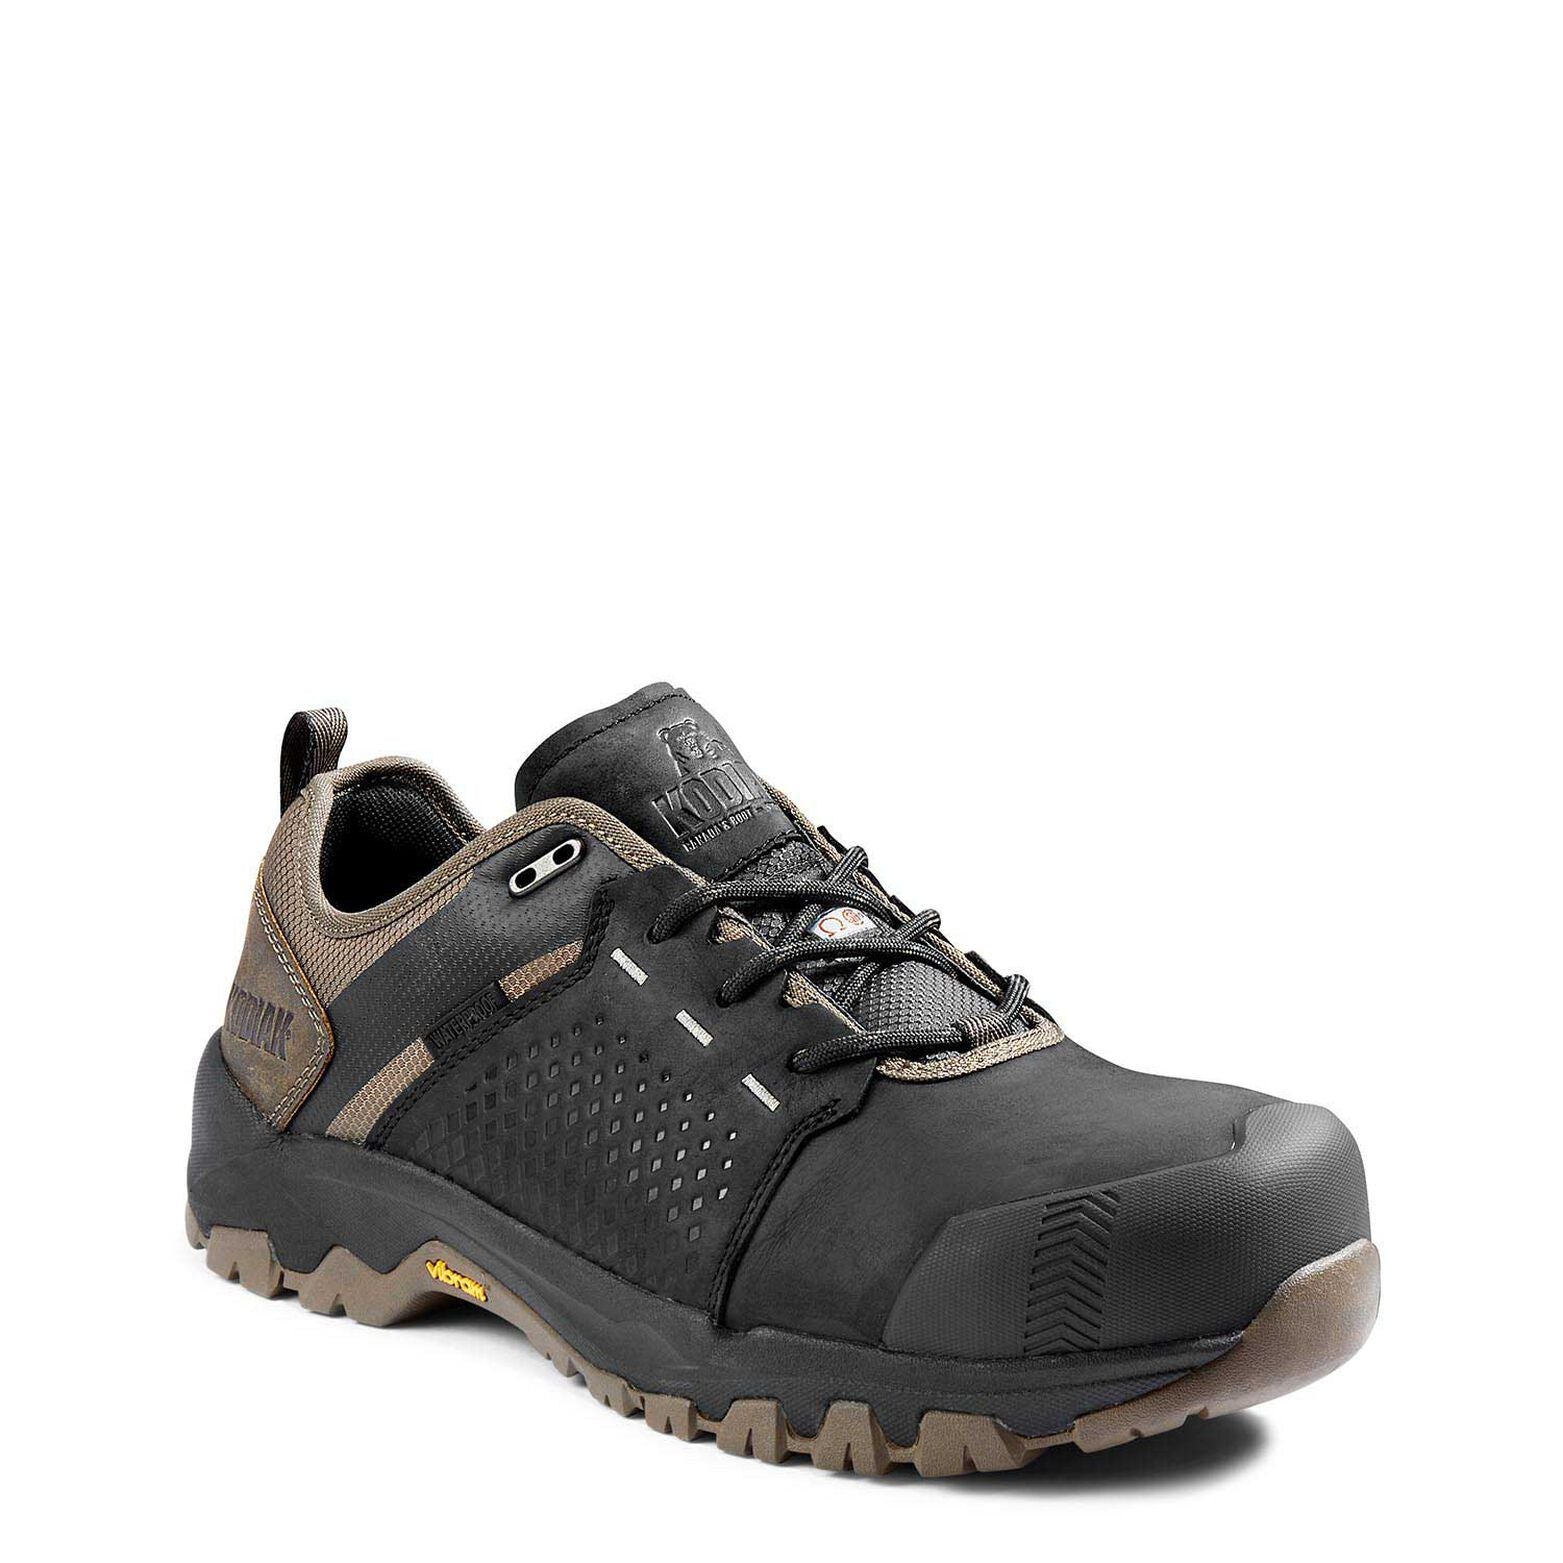 Kodiak Men's Safety Work Shoe Quest Full Grain Leather Hiker Waterproof with Composite Toe and Vibram® TC4+ Outsole